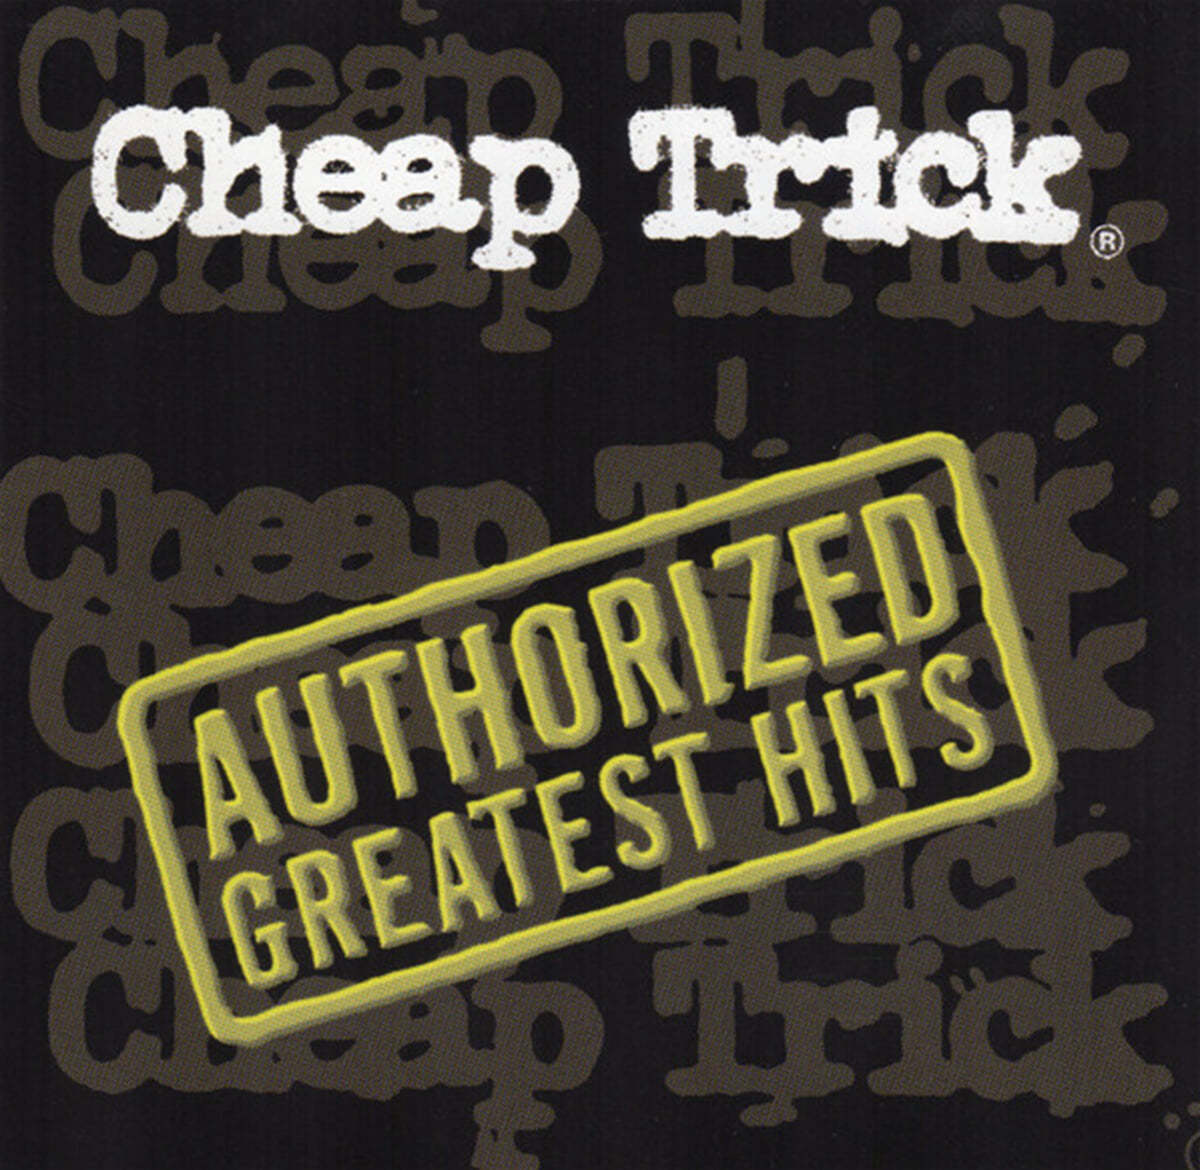 Cheap Trick (칩 트릭) - Authorized Greatest Hits [2LP]